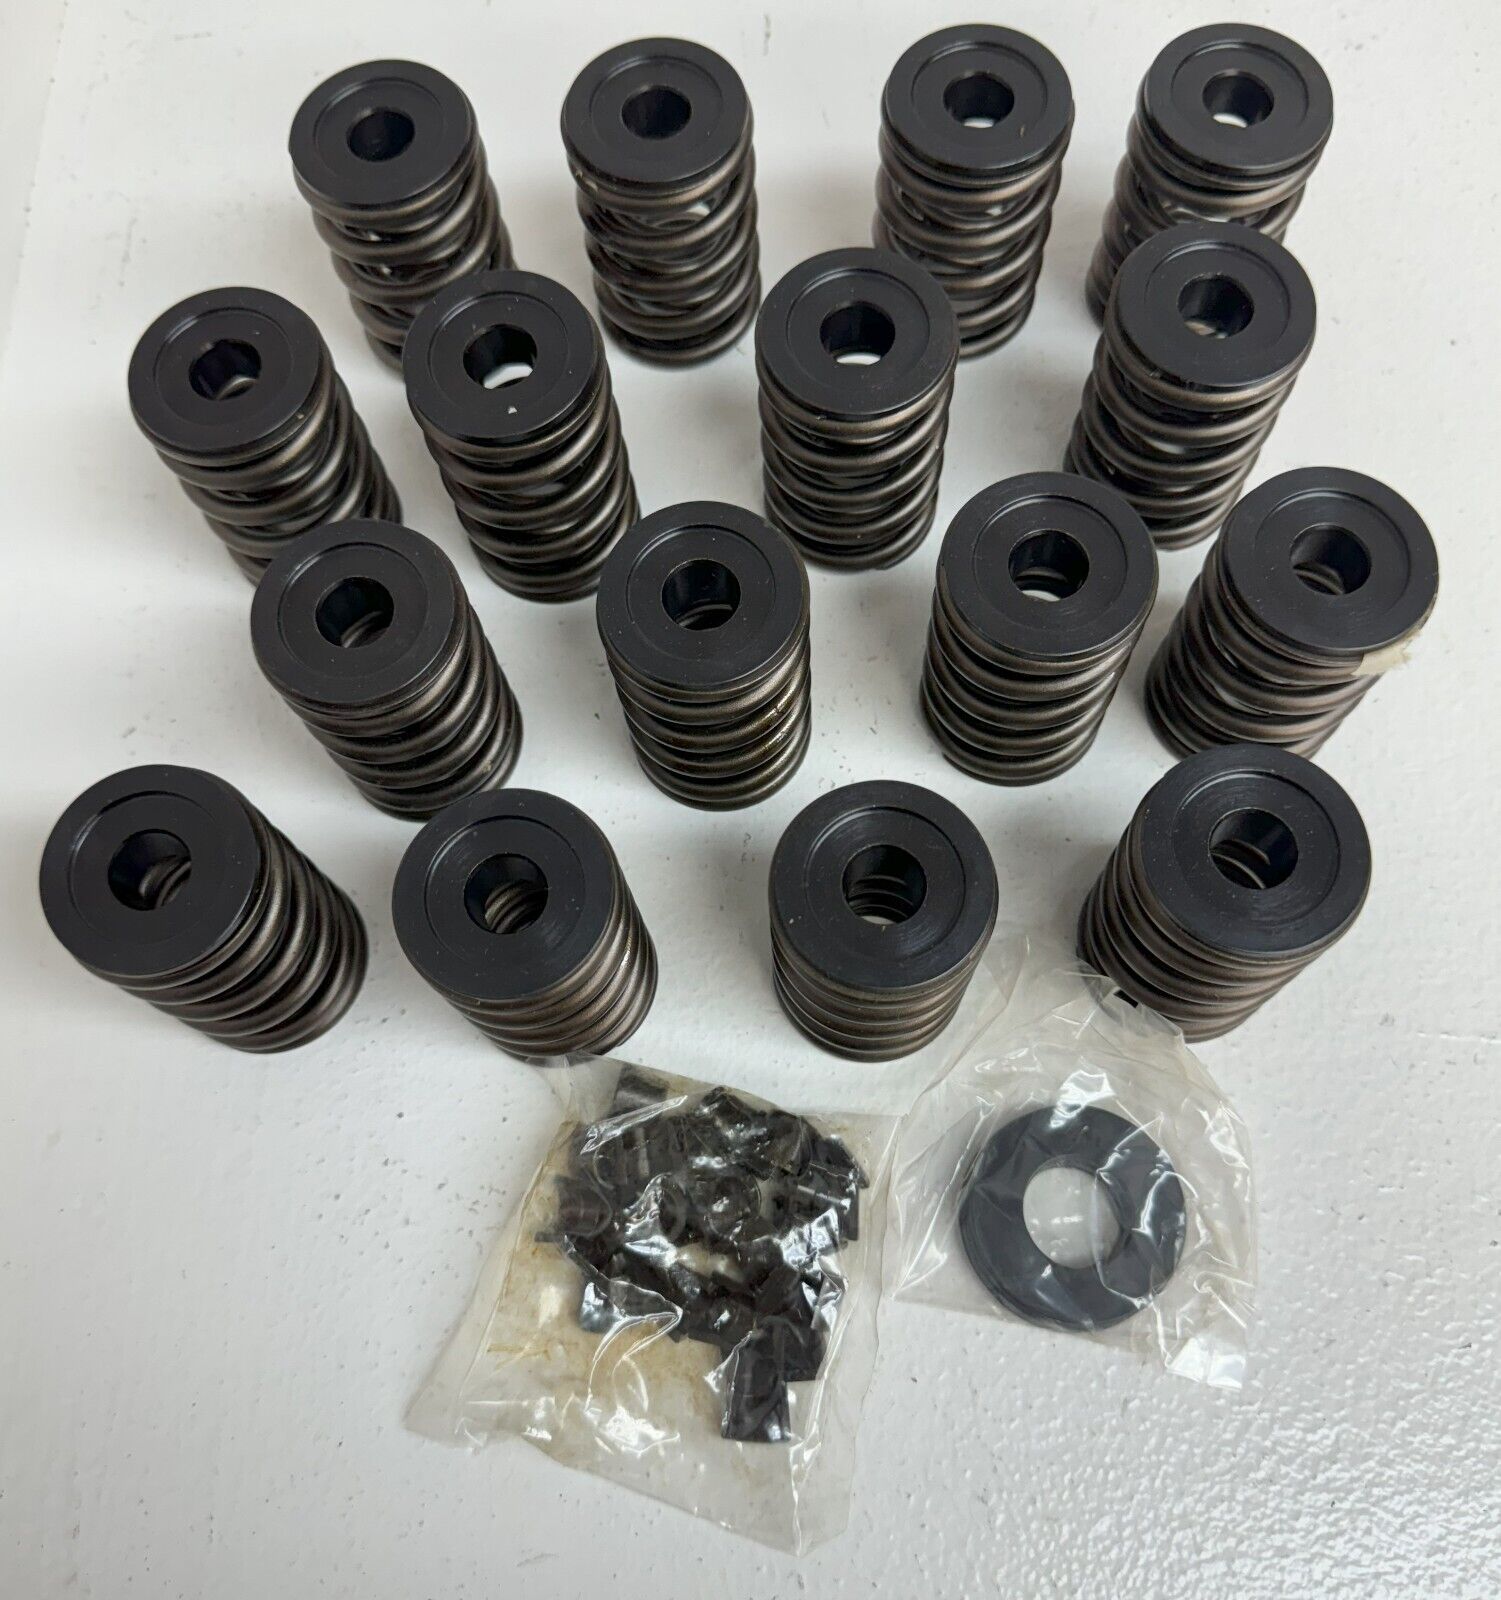 Crane Cams Valve Spring and Retainer Kits for Chevy V8